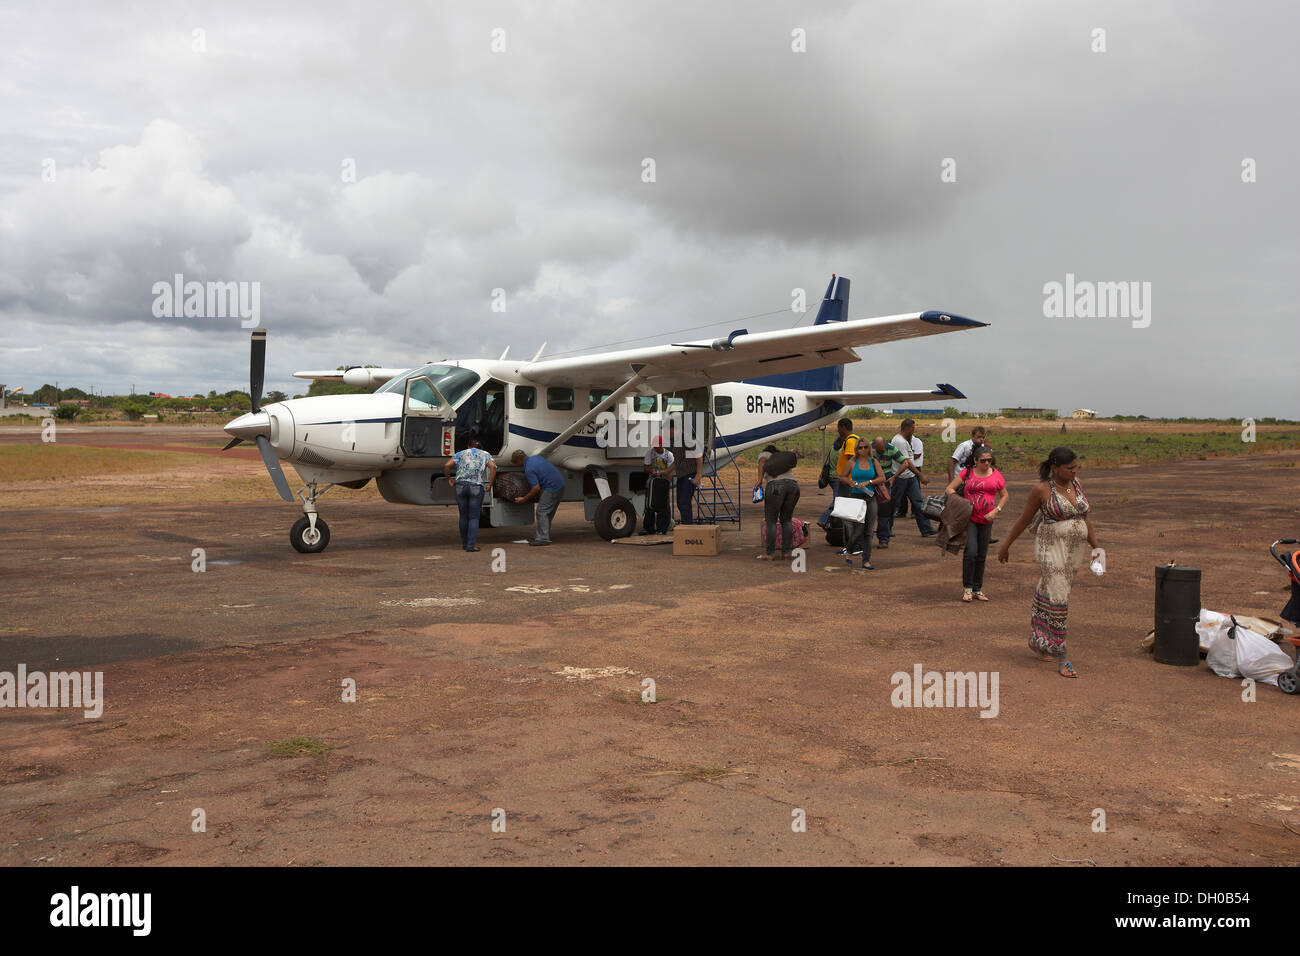 Passengers disembark from a small aircraft at Letham airport, Guyana, South America Stock Photo